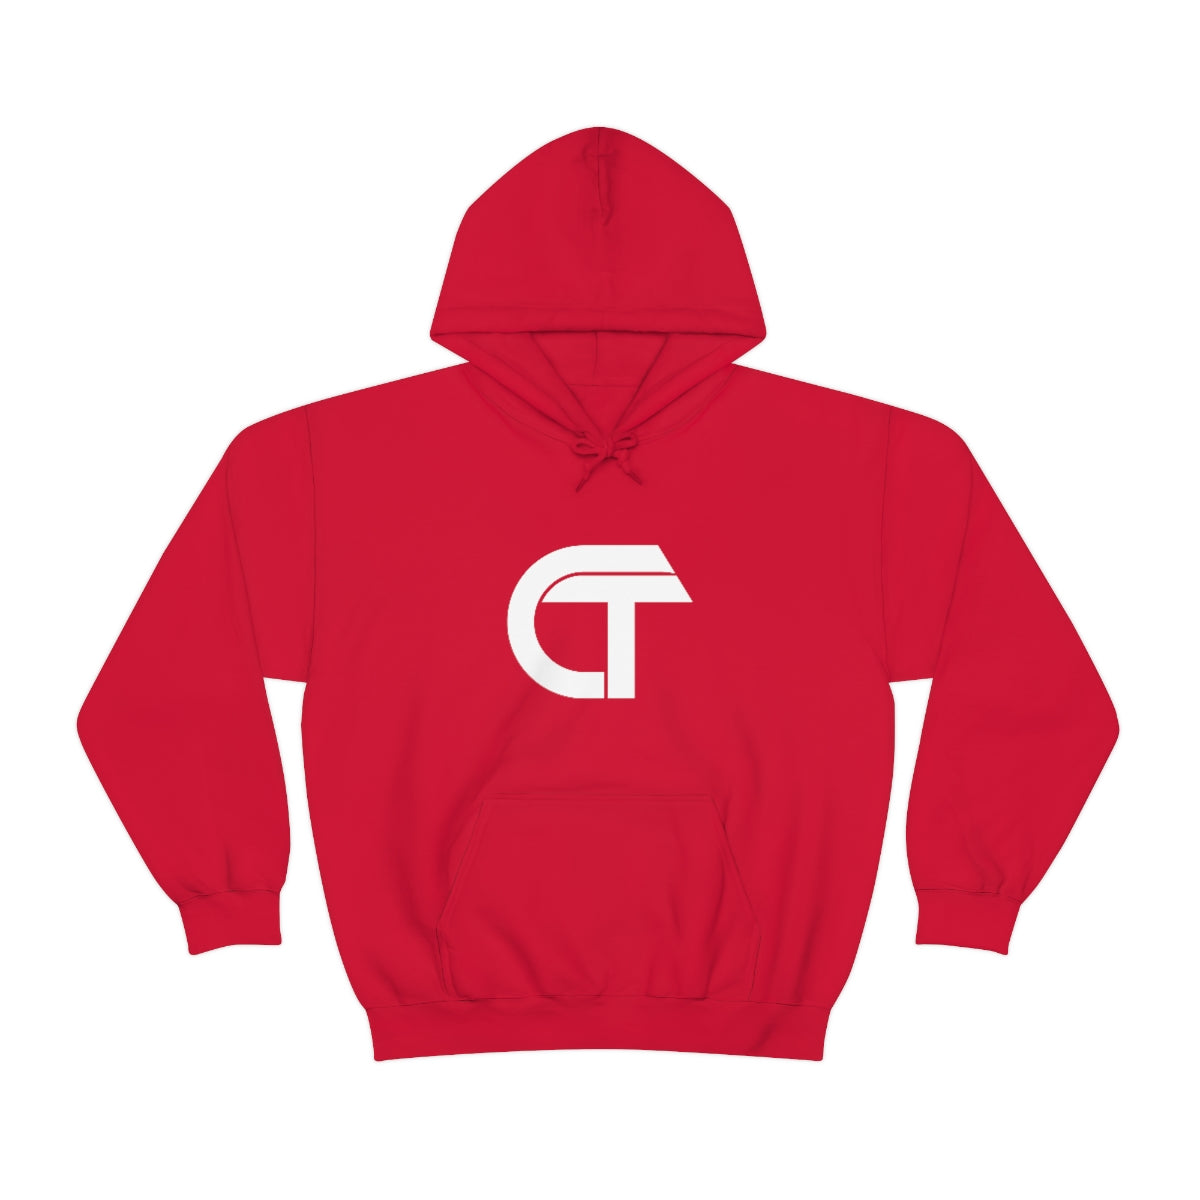 Christian Trapps "CT" Hoodie